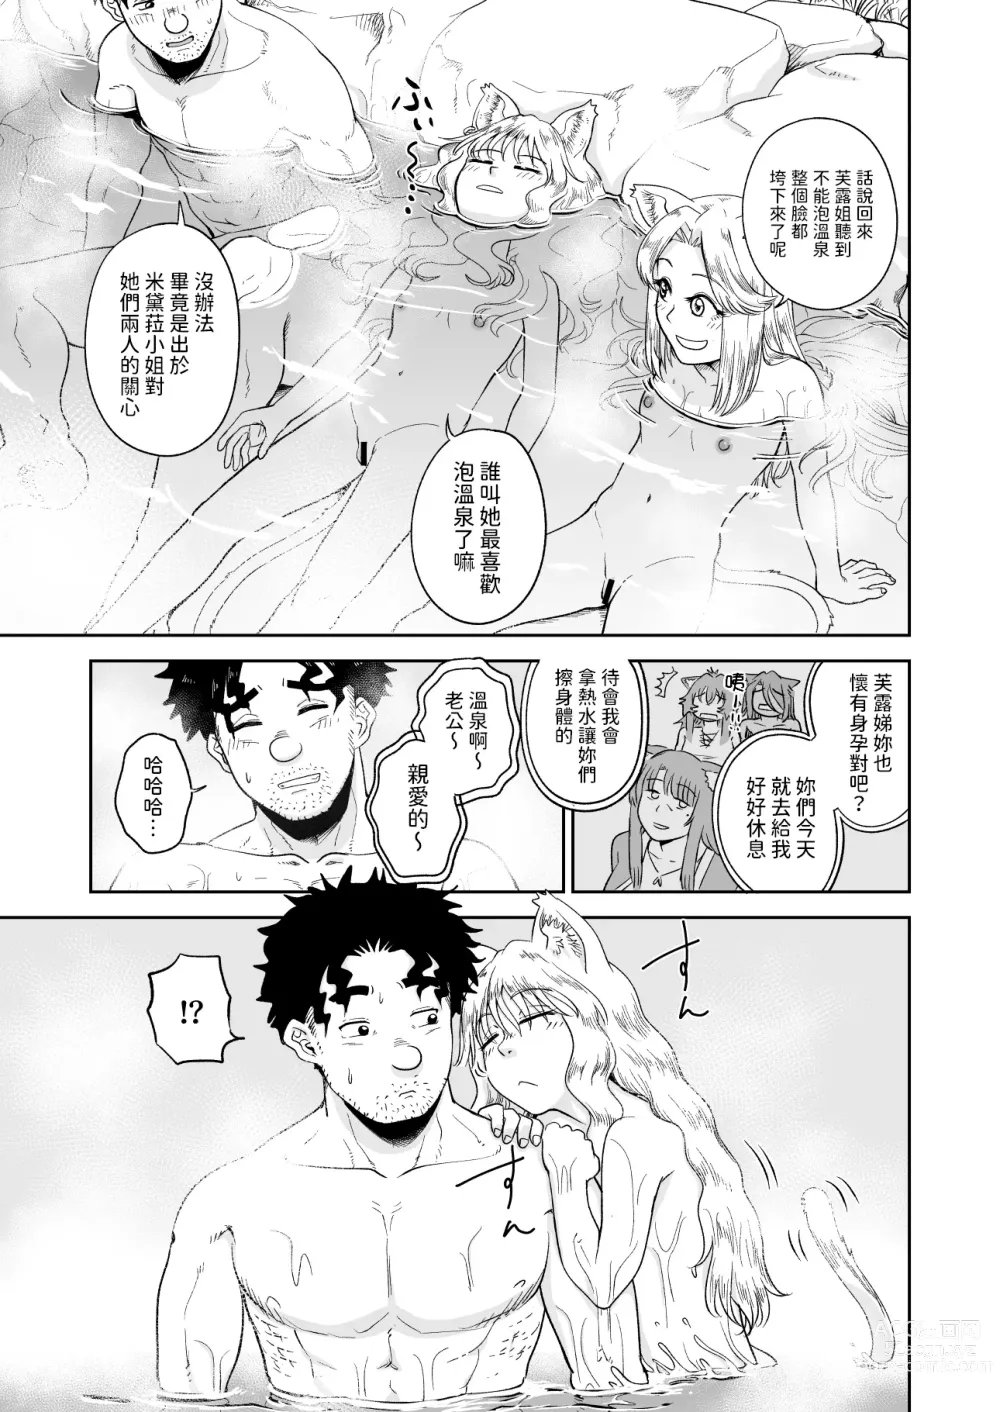 Page 9 of doujinshi ケモ耳娘とゼロから性活 3  中文翻譯